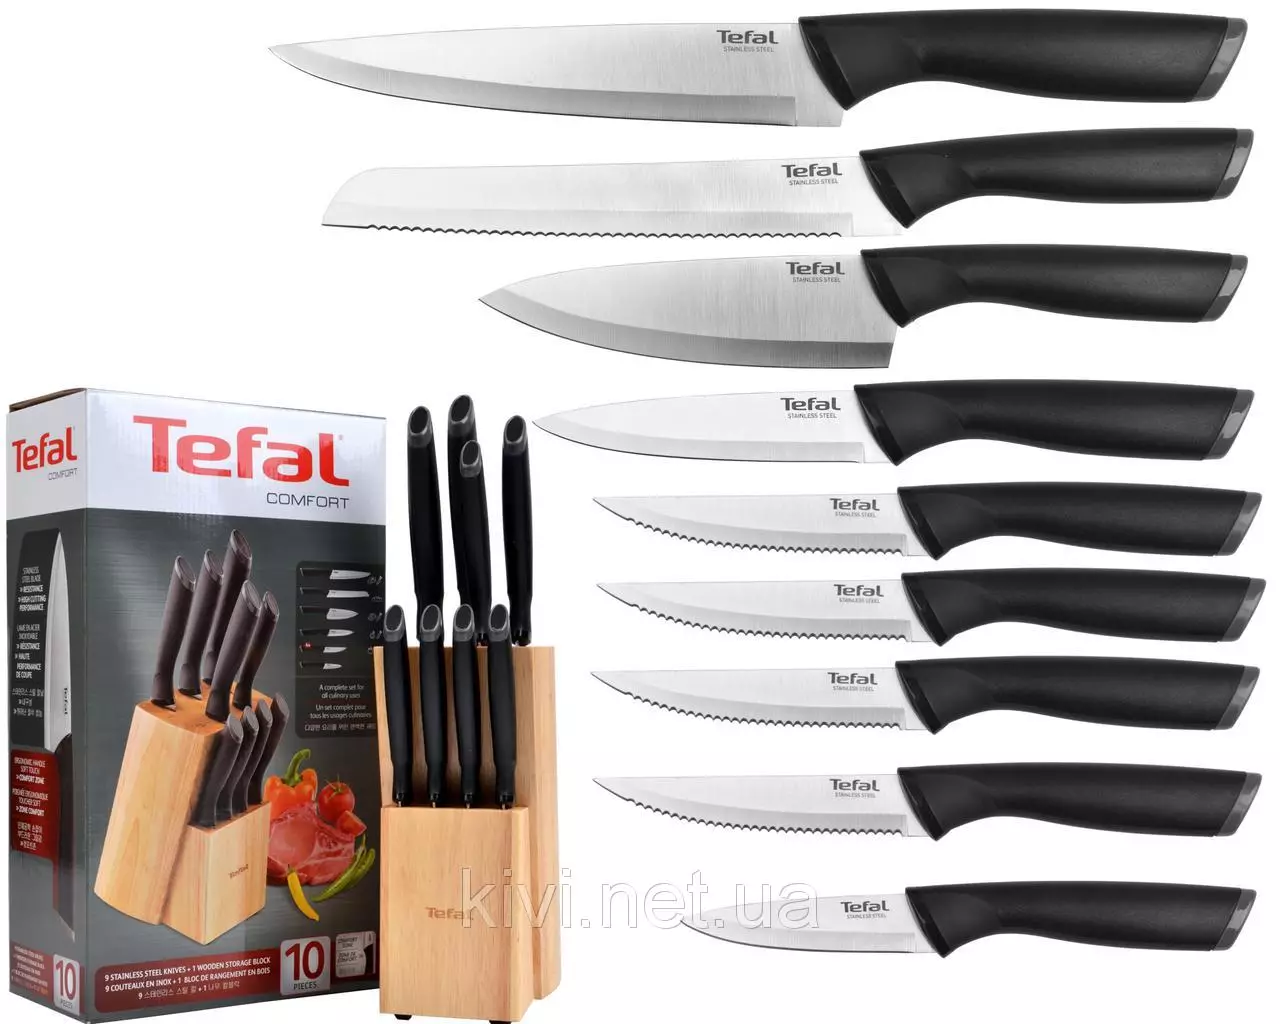 TEFAL knives: Overview of kitchen knives, Description Expertise and other series. Customer Reviews 23462_14